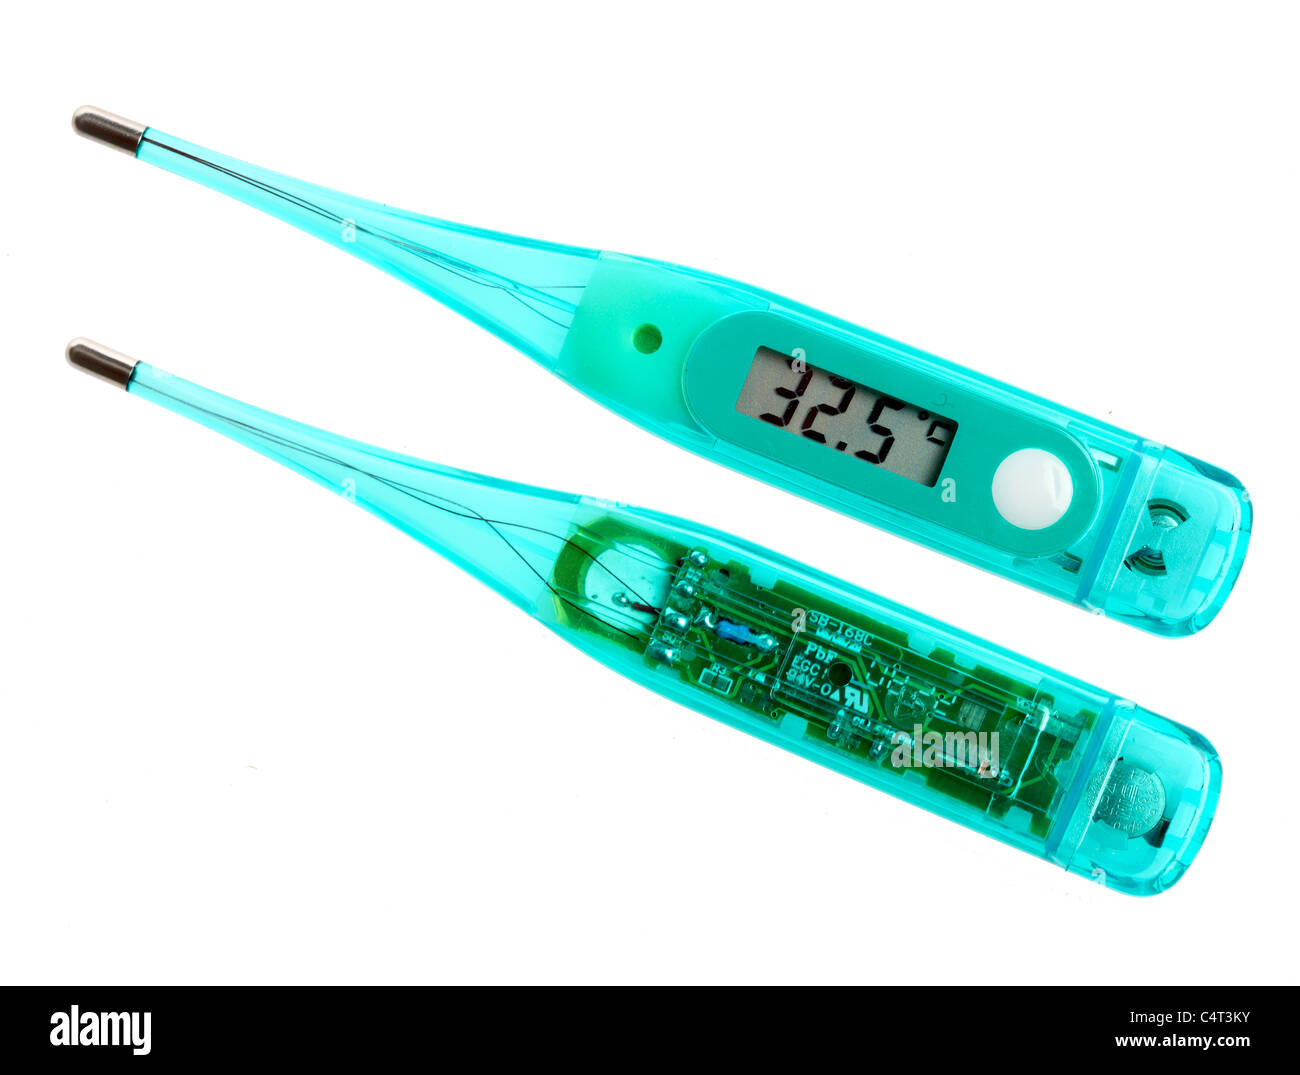 https://c8.alamy.com/comp/C4T3KY/digital-clinical-thermometer-for-measuring-the-body-heat-of-a-patient-C4T3KY.jpg